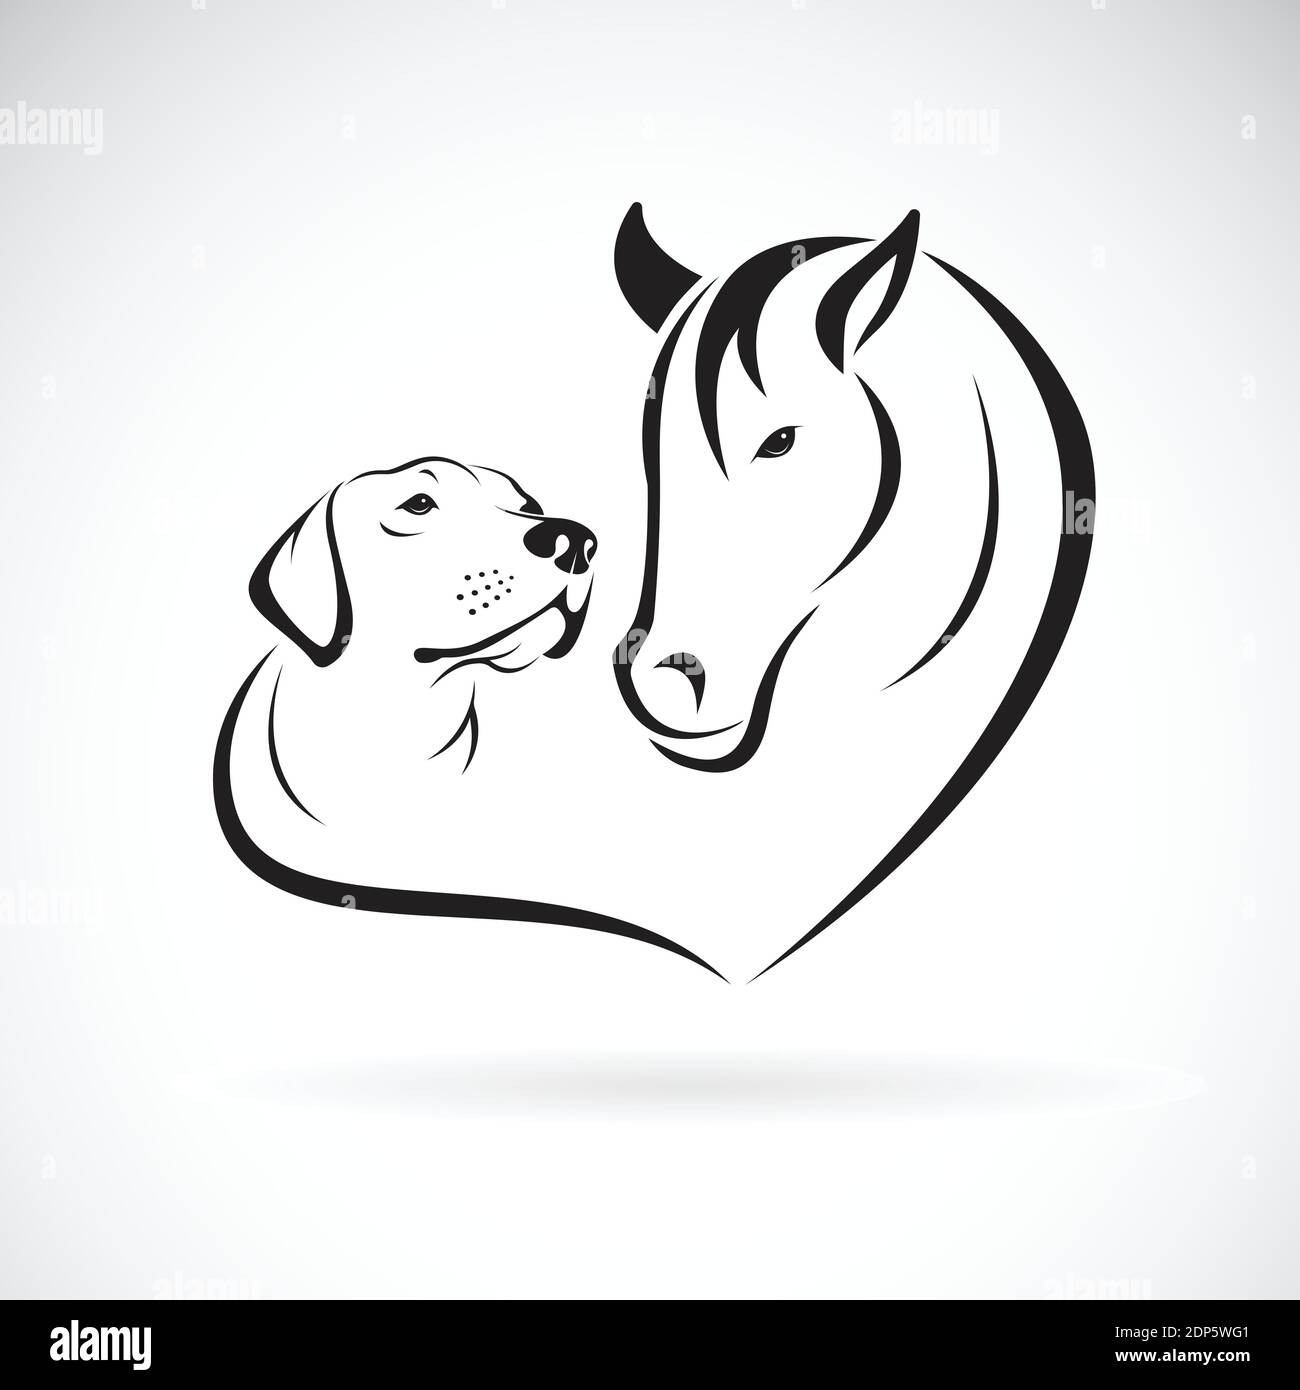 Horse and dog design on hoodie or blouson